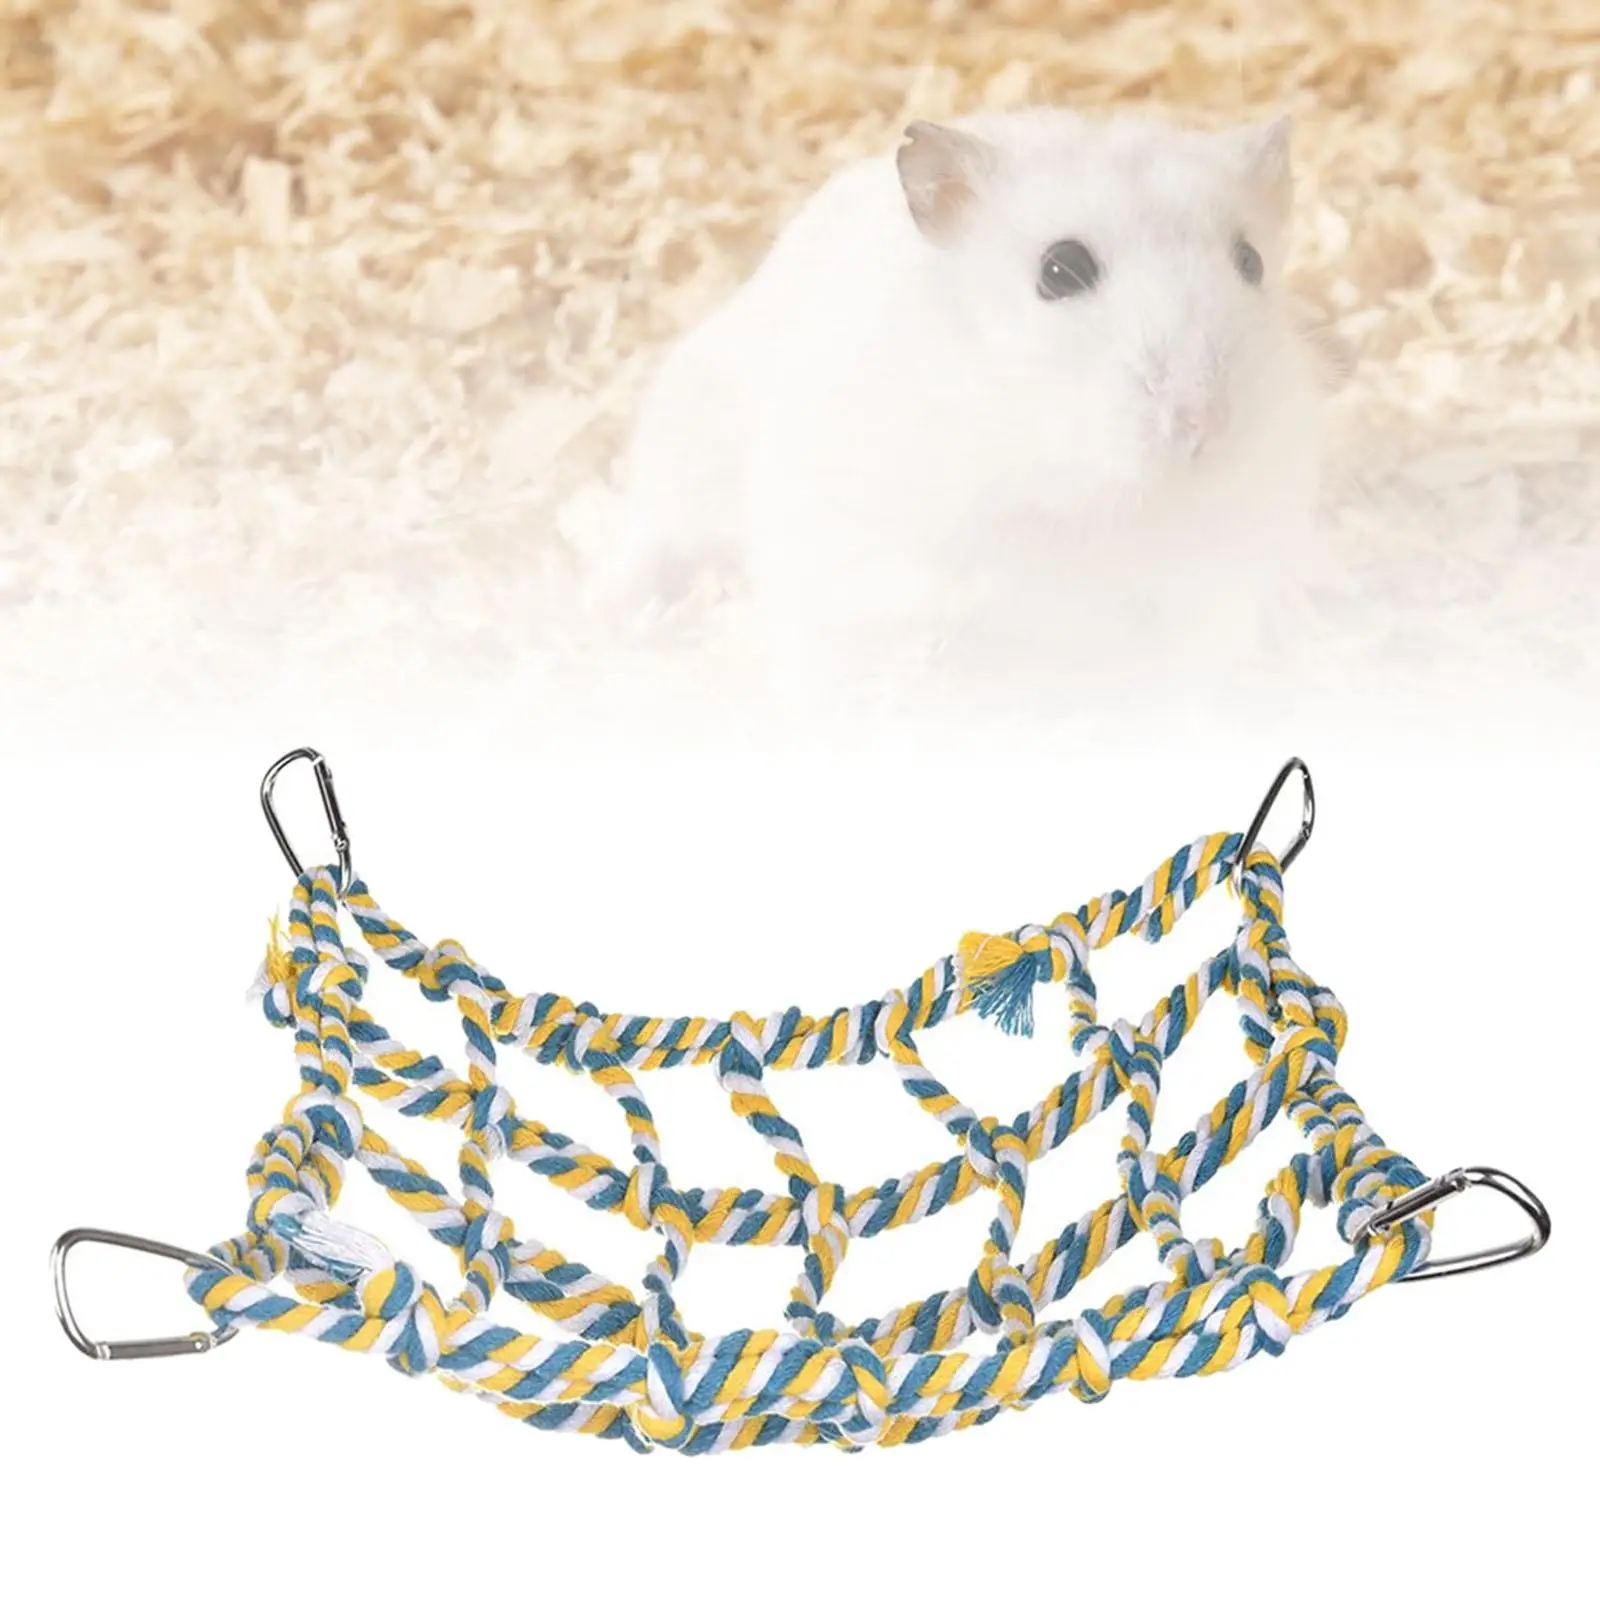 Hamster Hammock rope Hanging Hammock for Cage Ladder Hanging Toys with 4 Hooks Hanging Climbing Net for Cockatiel Small Bird